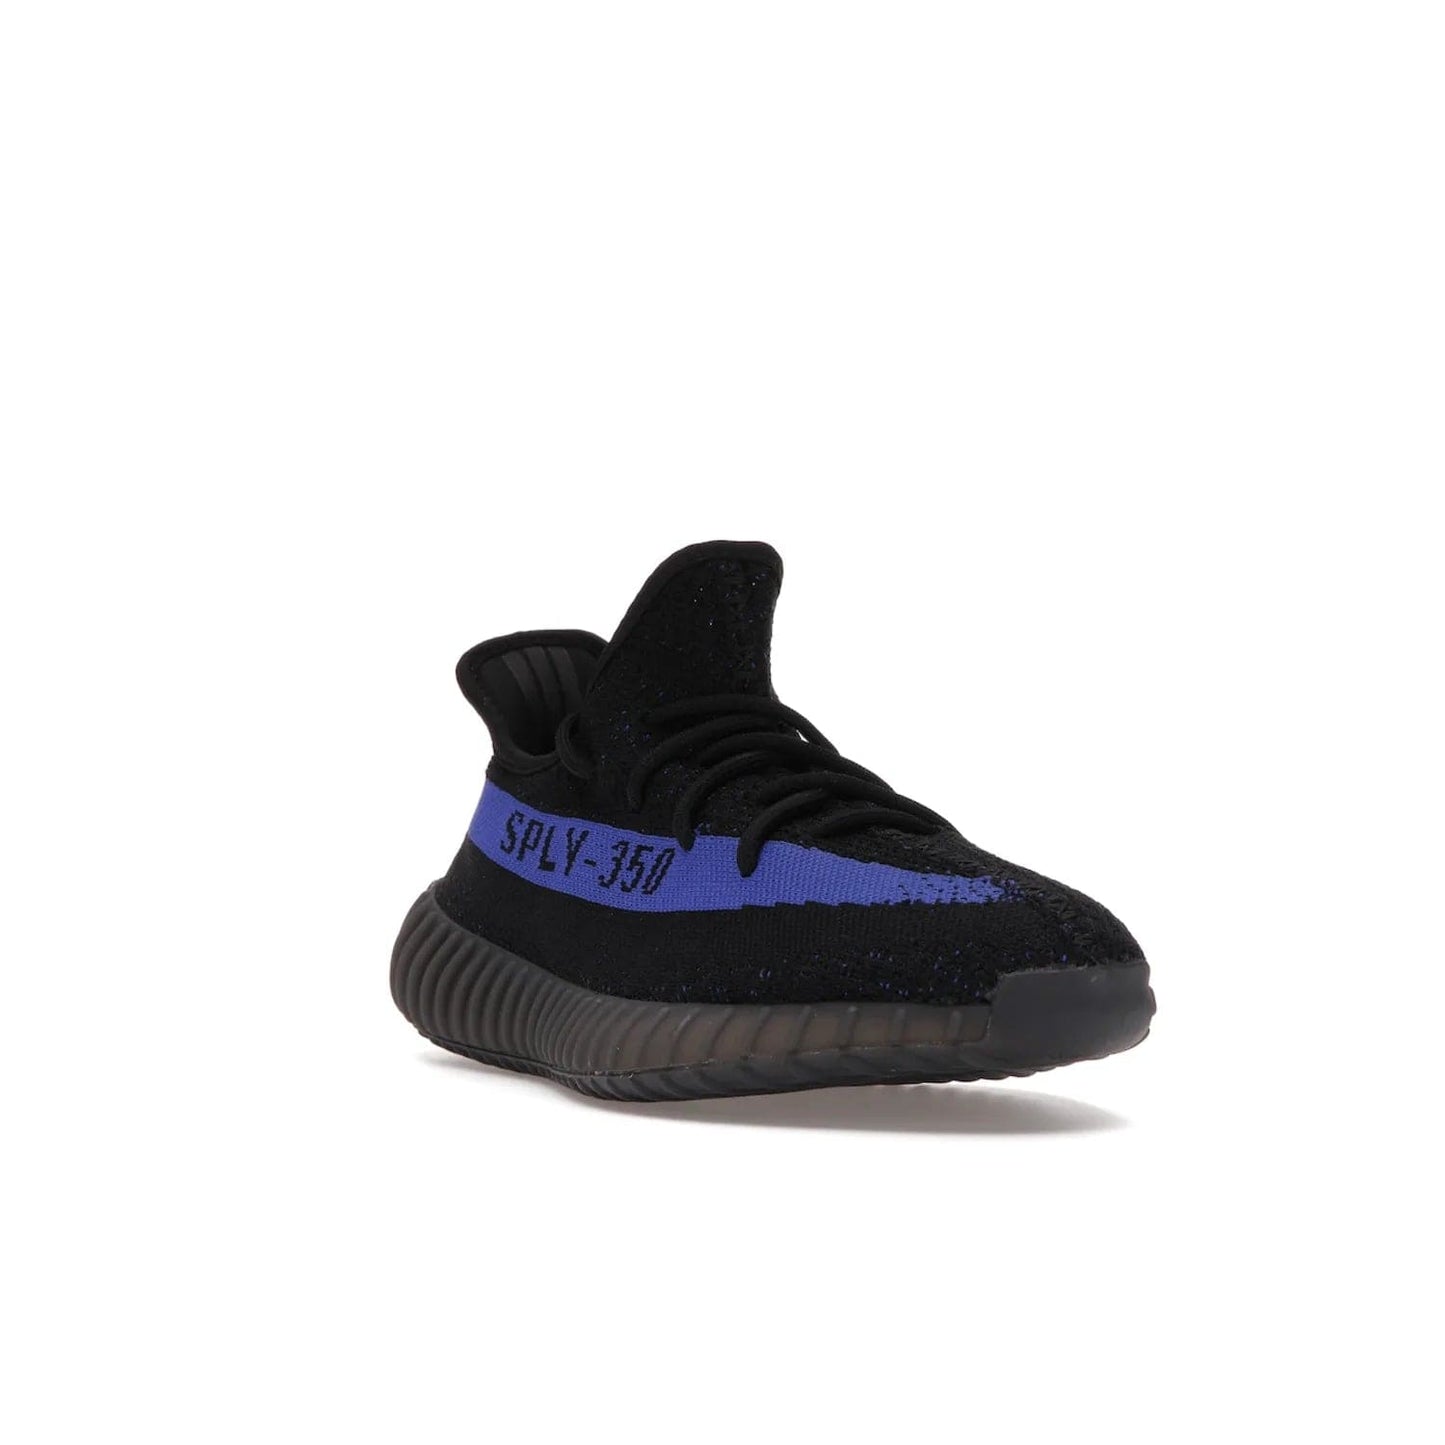 adidas Yeezy Boost 350 V2 Dazzling Blue - Image 7 - Only at www.BallersClubKickz.com - Shop the Adidas Yeezy 350 V2 Dazzling Blue, featuring a solid black Primeknit upper, Dazzling Blue side stripe, “SPLY-350” text, and a muted Boost sole. Releasing Feb 2022, this style is perfect for any shoe fan.